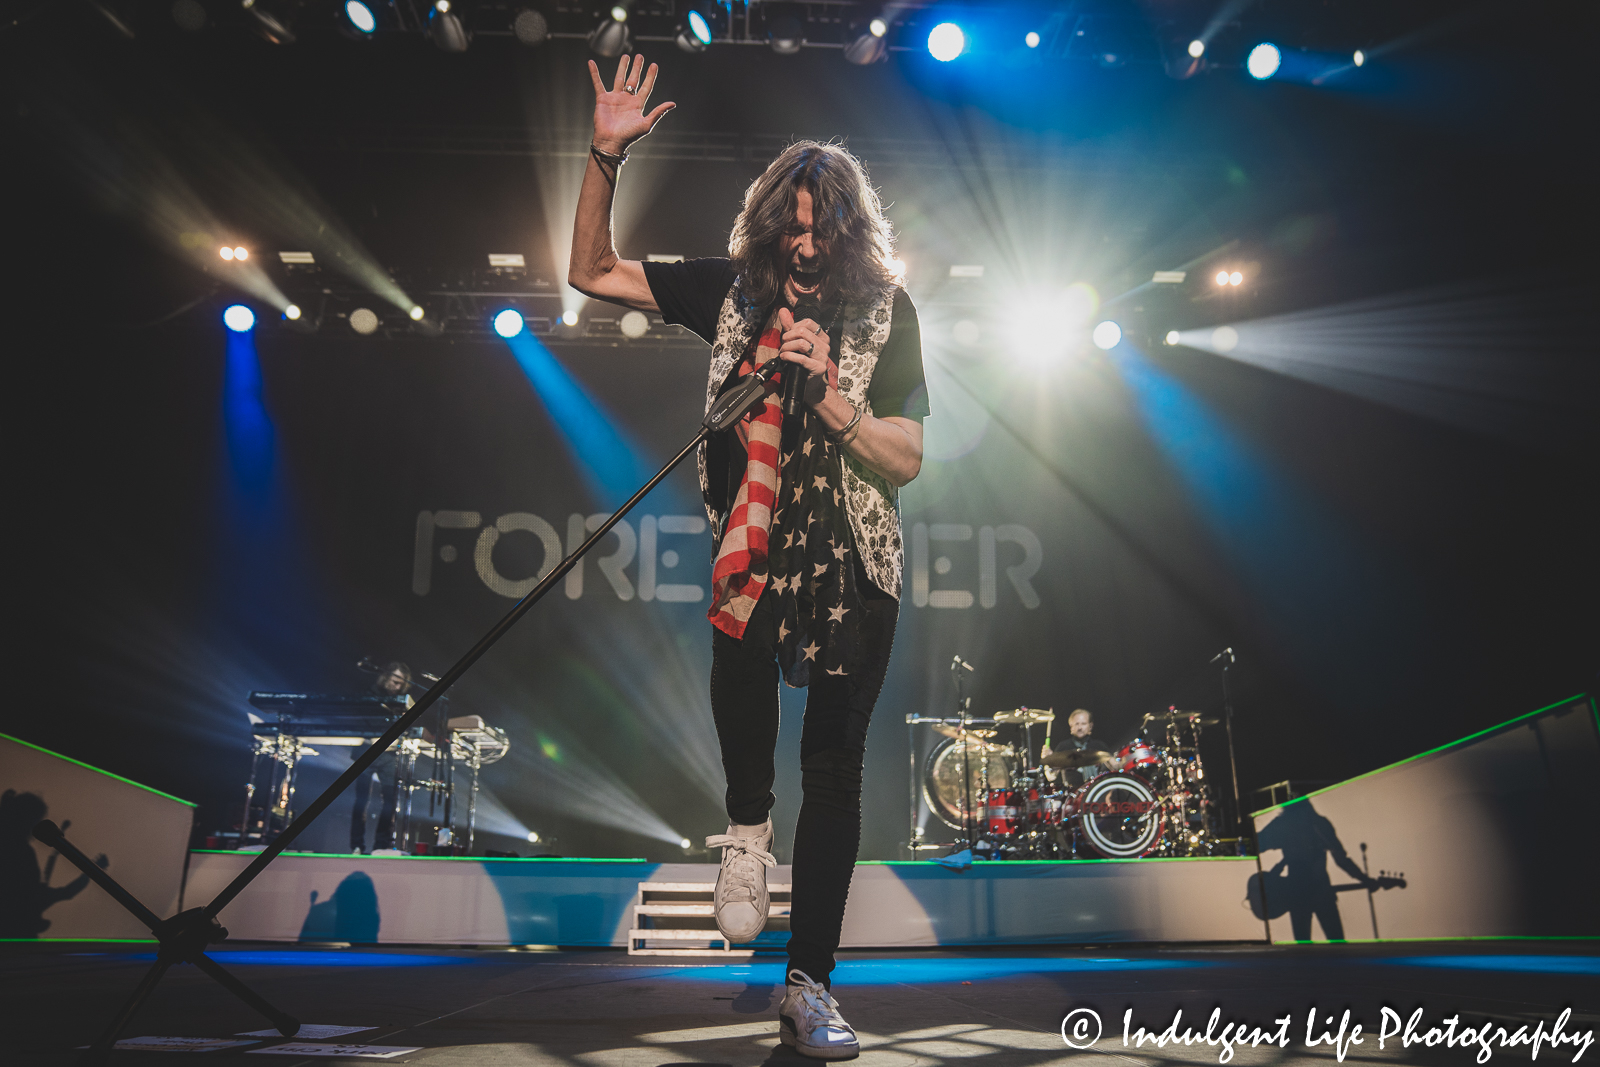 Lead singer Kelly Hansen of Foreigner belting out "Cold as Ice" as he performs live at Hartman Arena in Park City, KS on April 30, 2023.